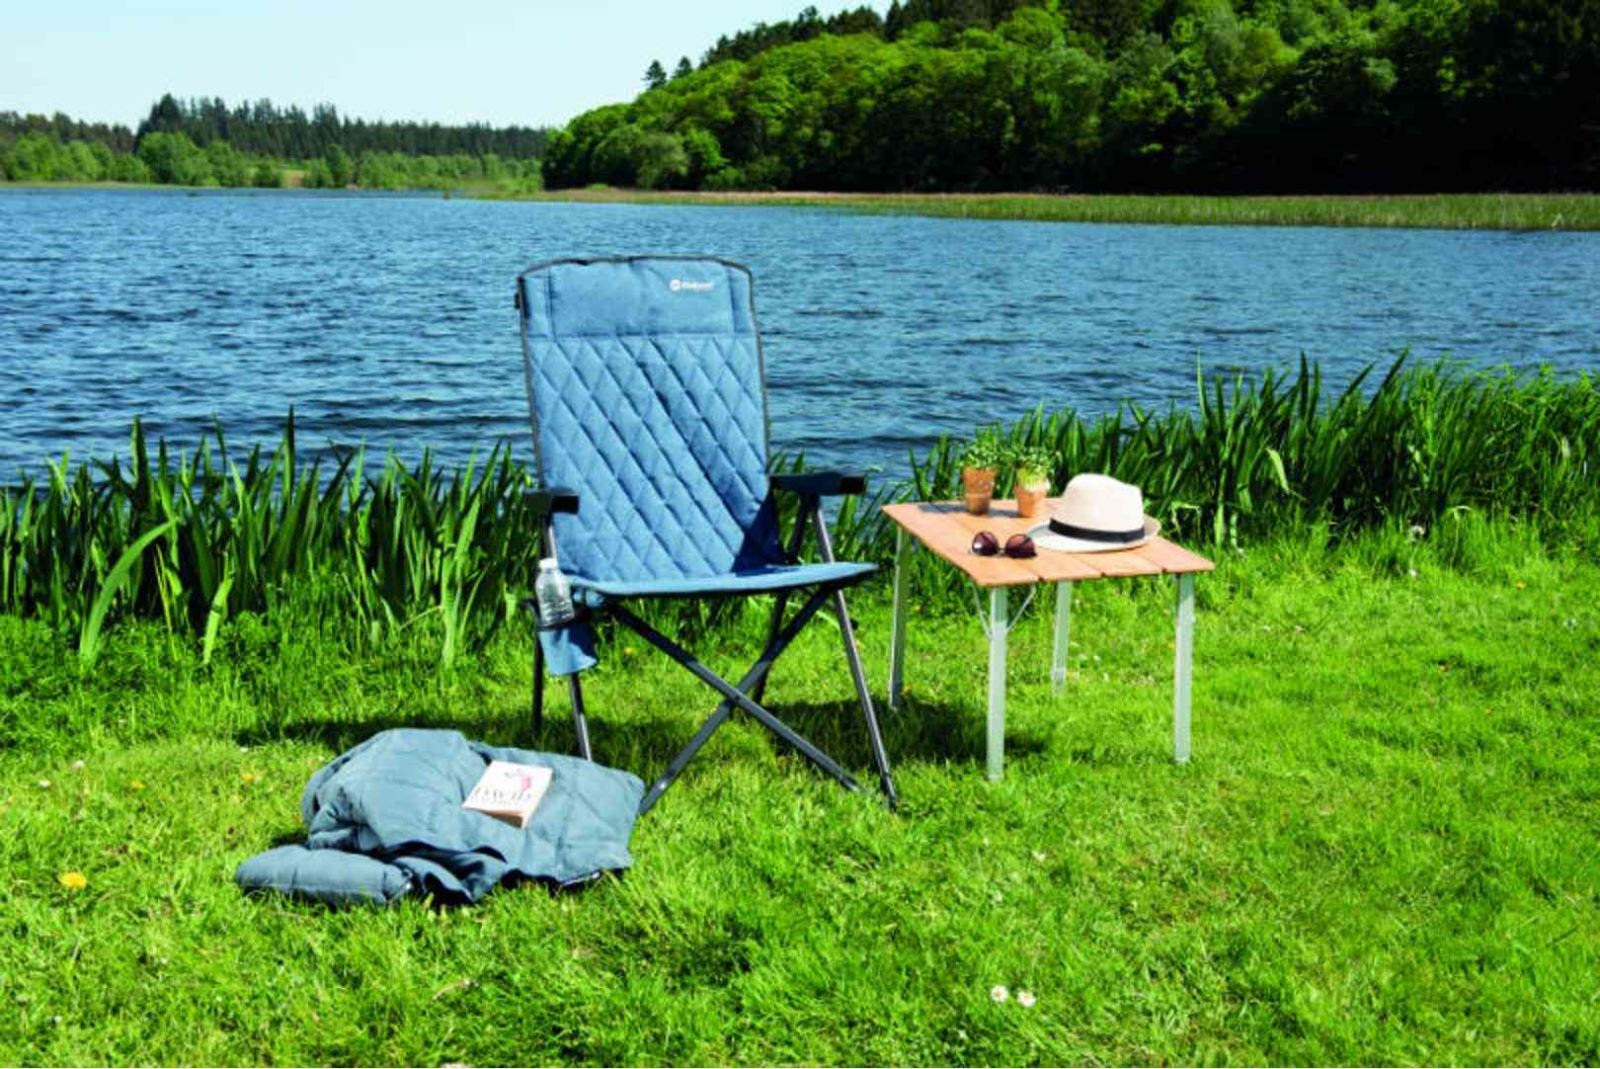 An Outwell camping chair